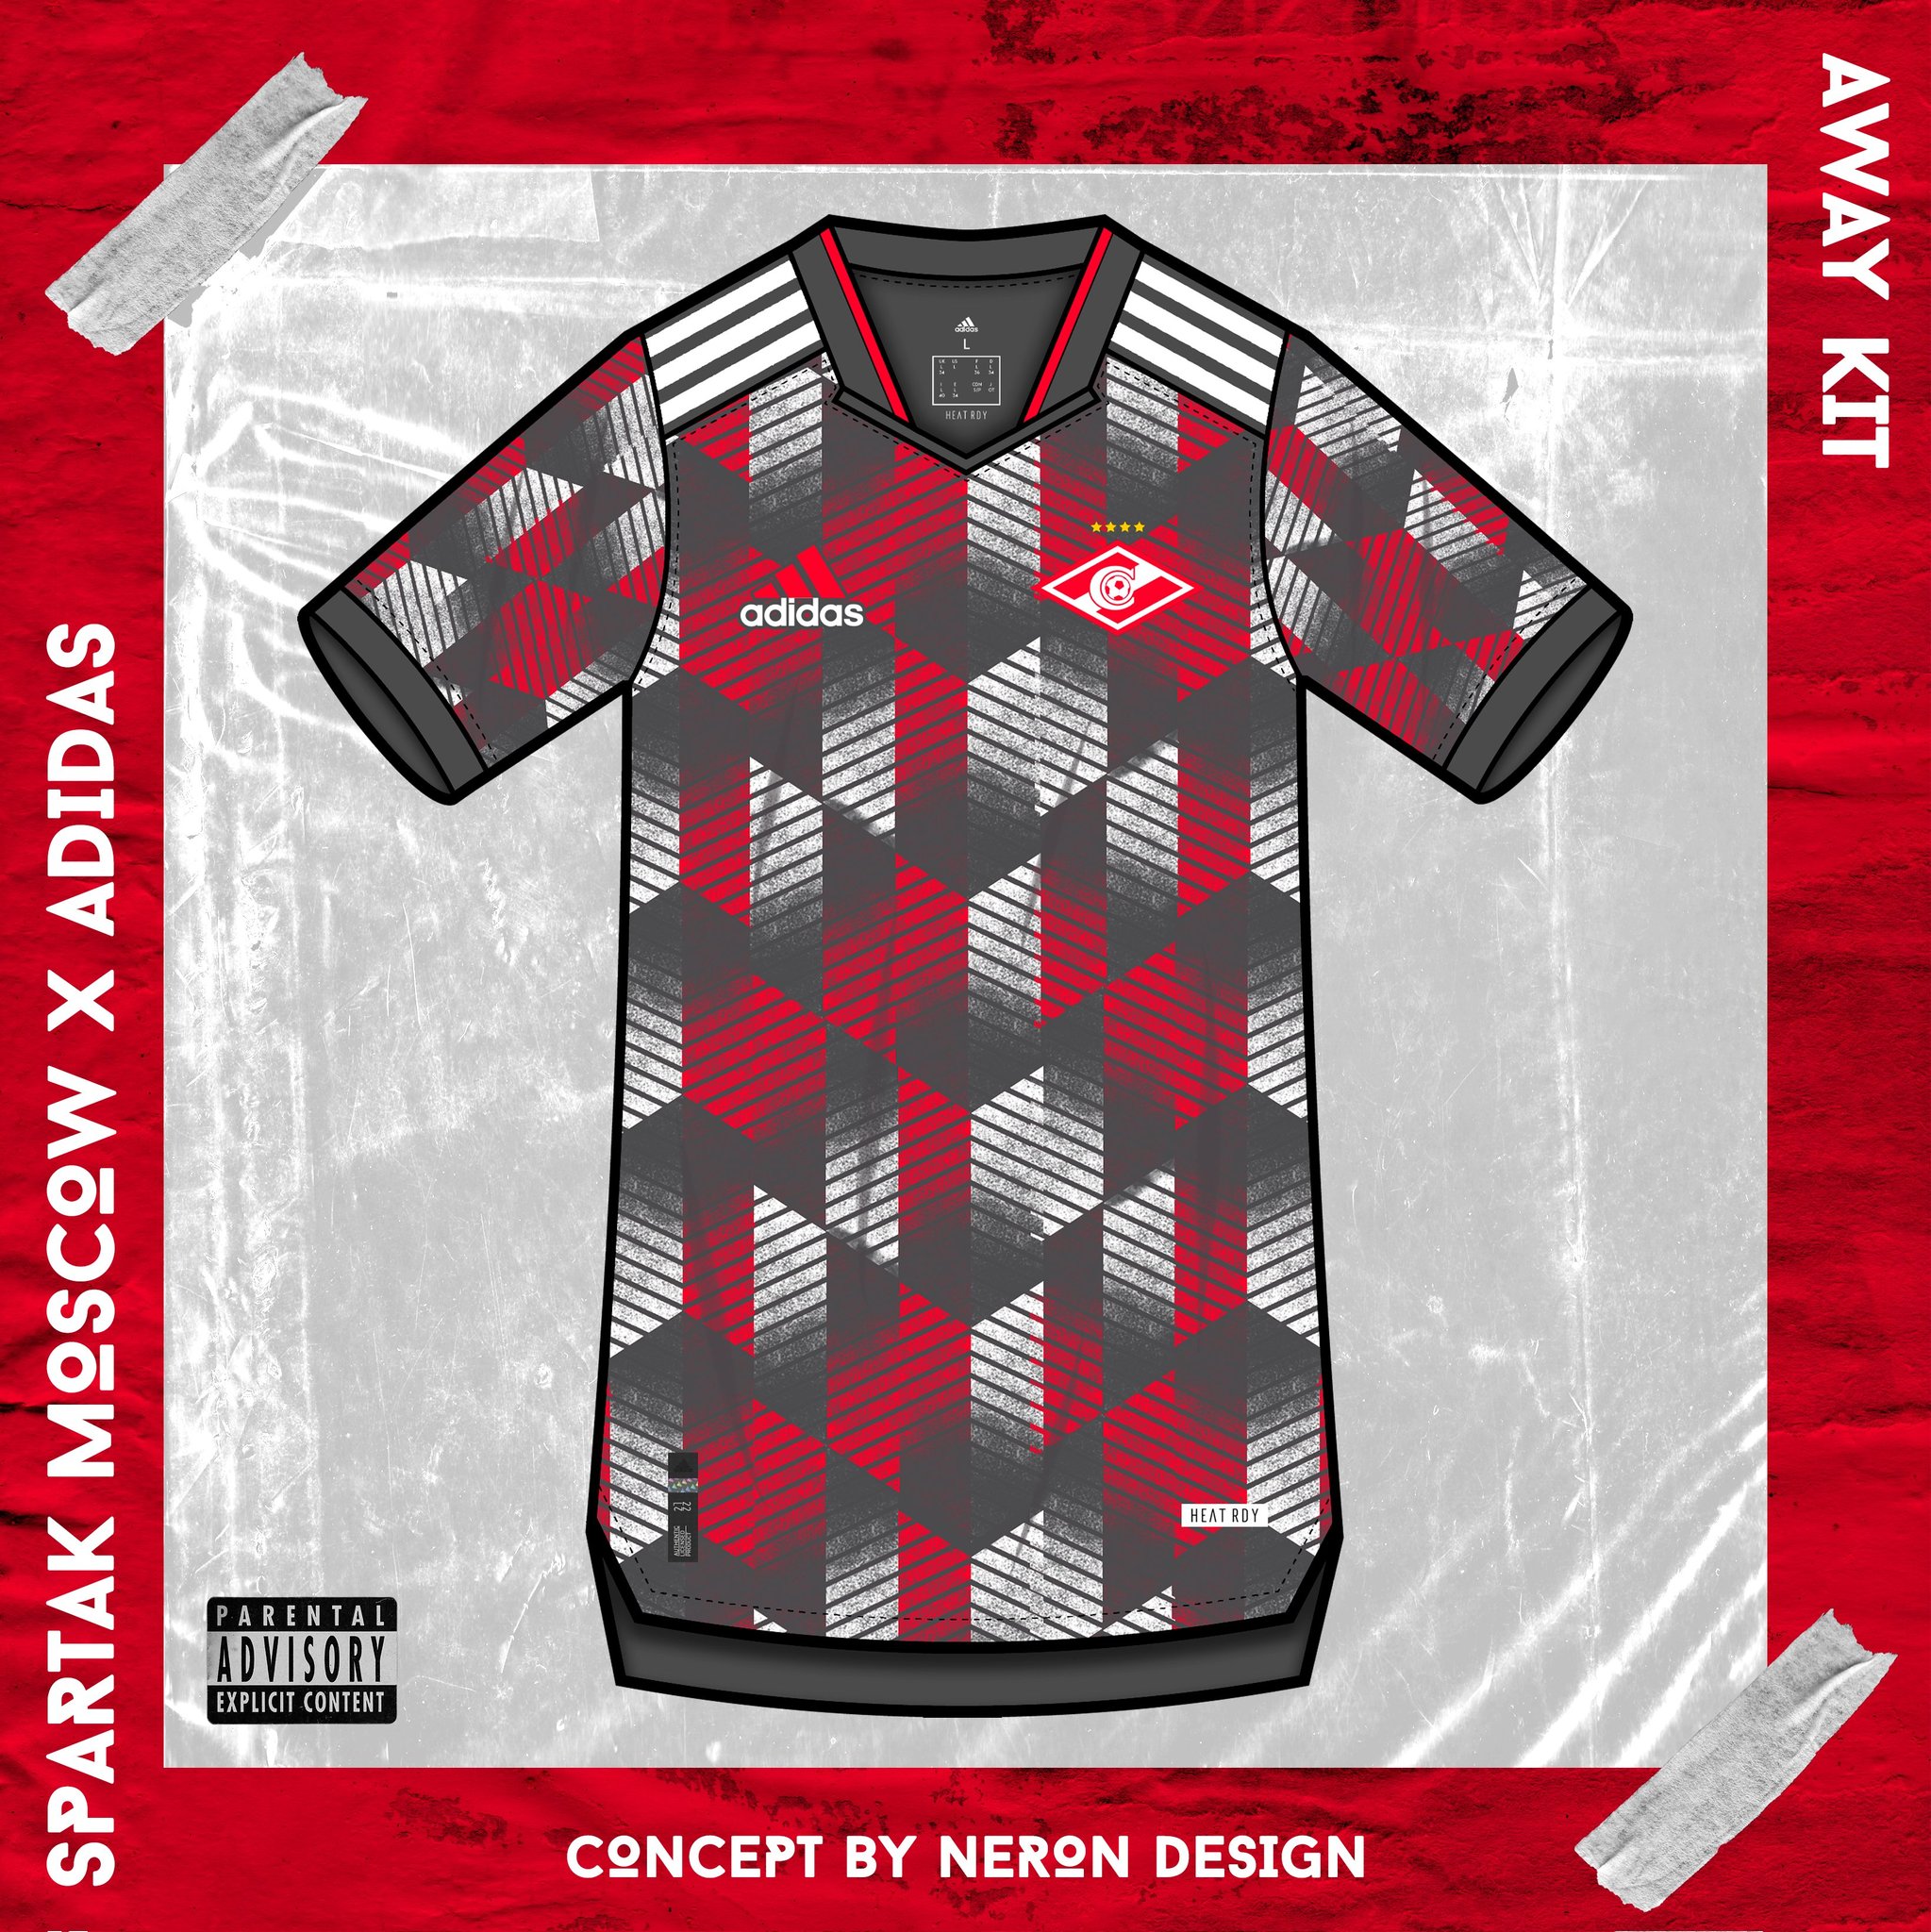 Spartak Moscow 2021-22 Home Kit